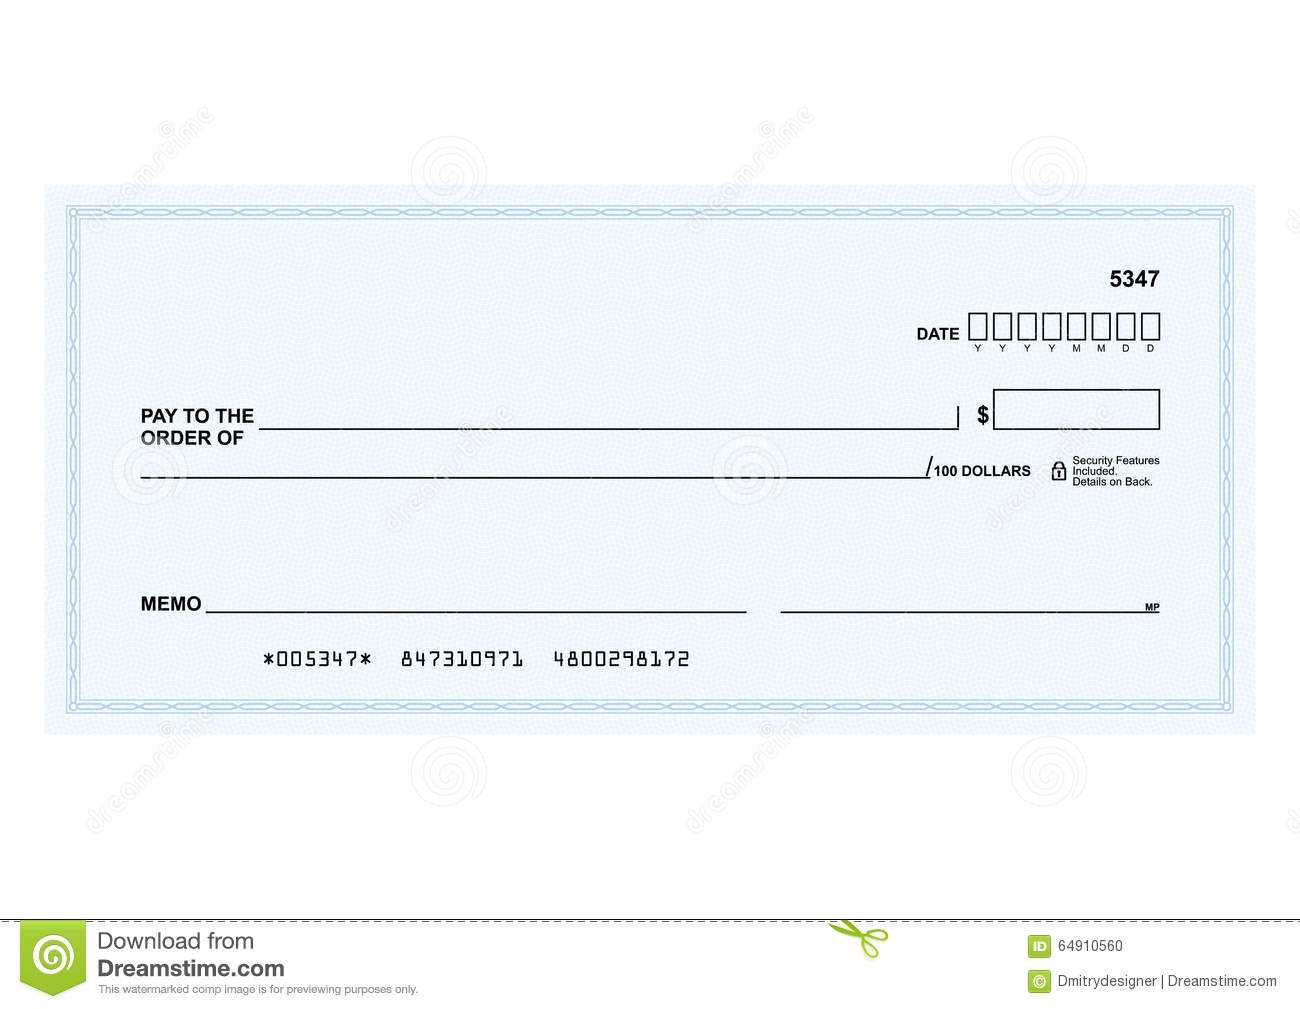 Blank Business Check Template. Business Reference Form Pnc Intended For Blank Business Check Template